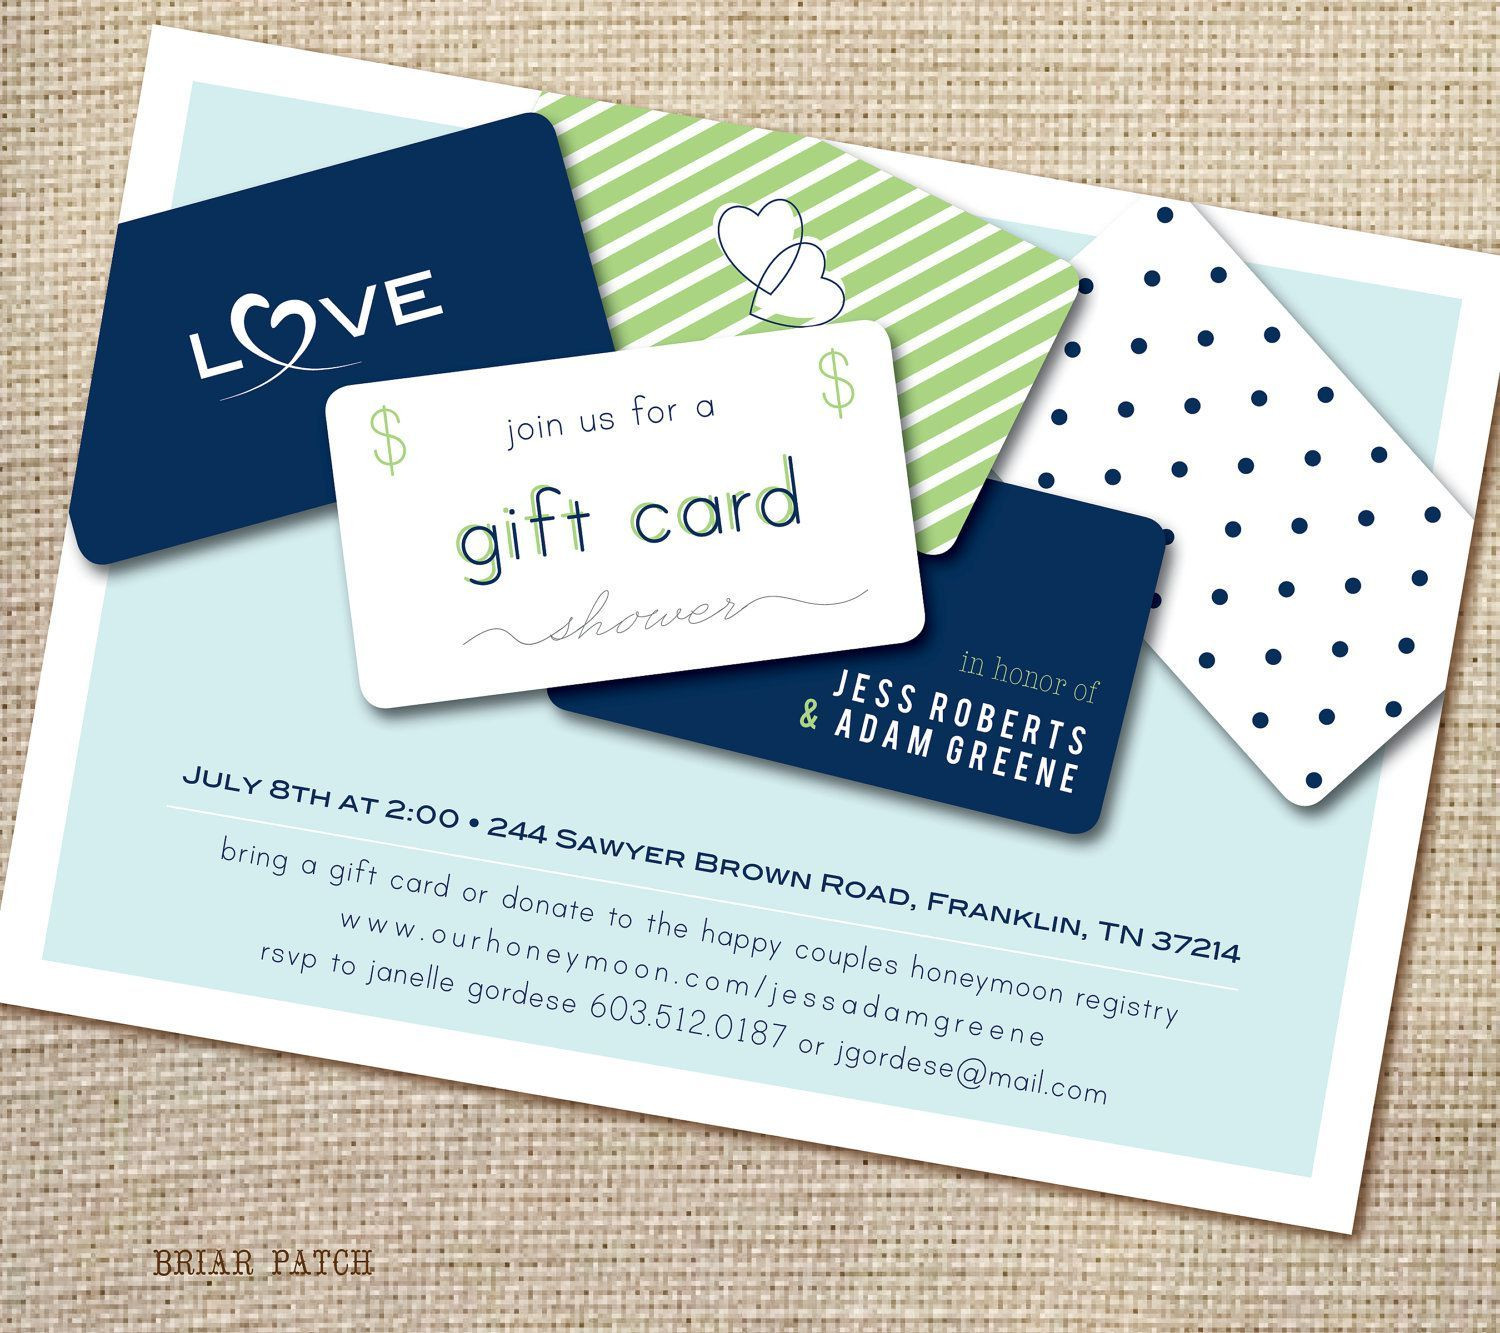 20 Of the Best Ideas for Gift Card Ideas for Couples Home, Family